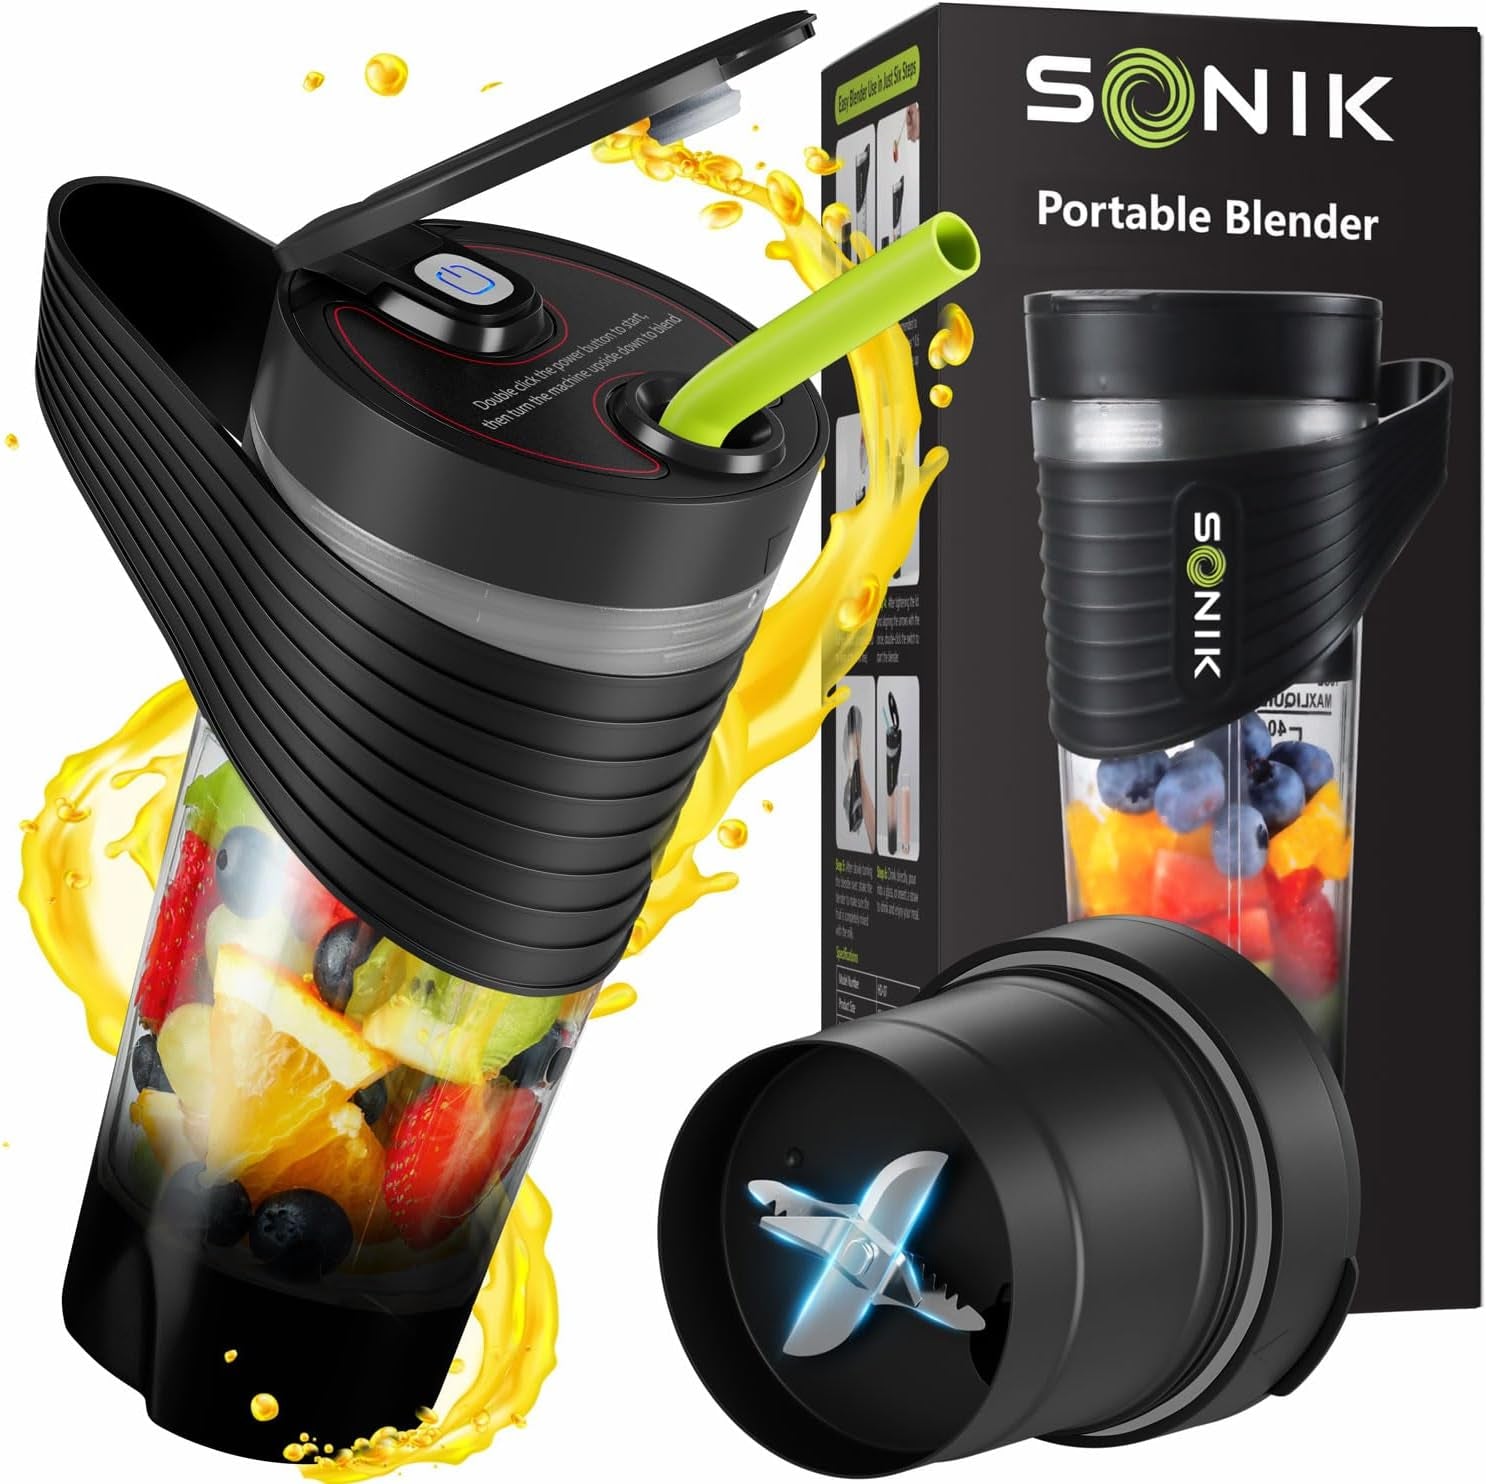 Portable Blender for Shakes and Smoothies with 6 Ultra Sharp Blades, Powerful 16 OZ Personal Sized Blender Perfect for Traveling, BPA Free and USB Rechargeable (Black)  Sonik Black  